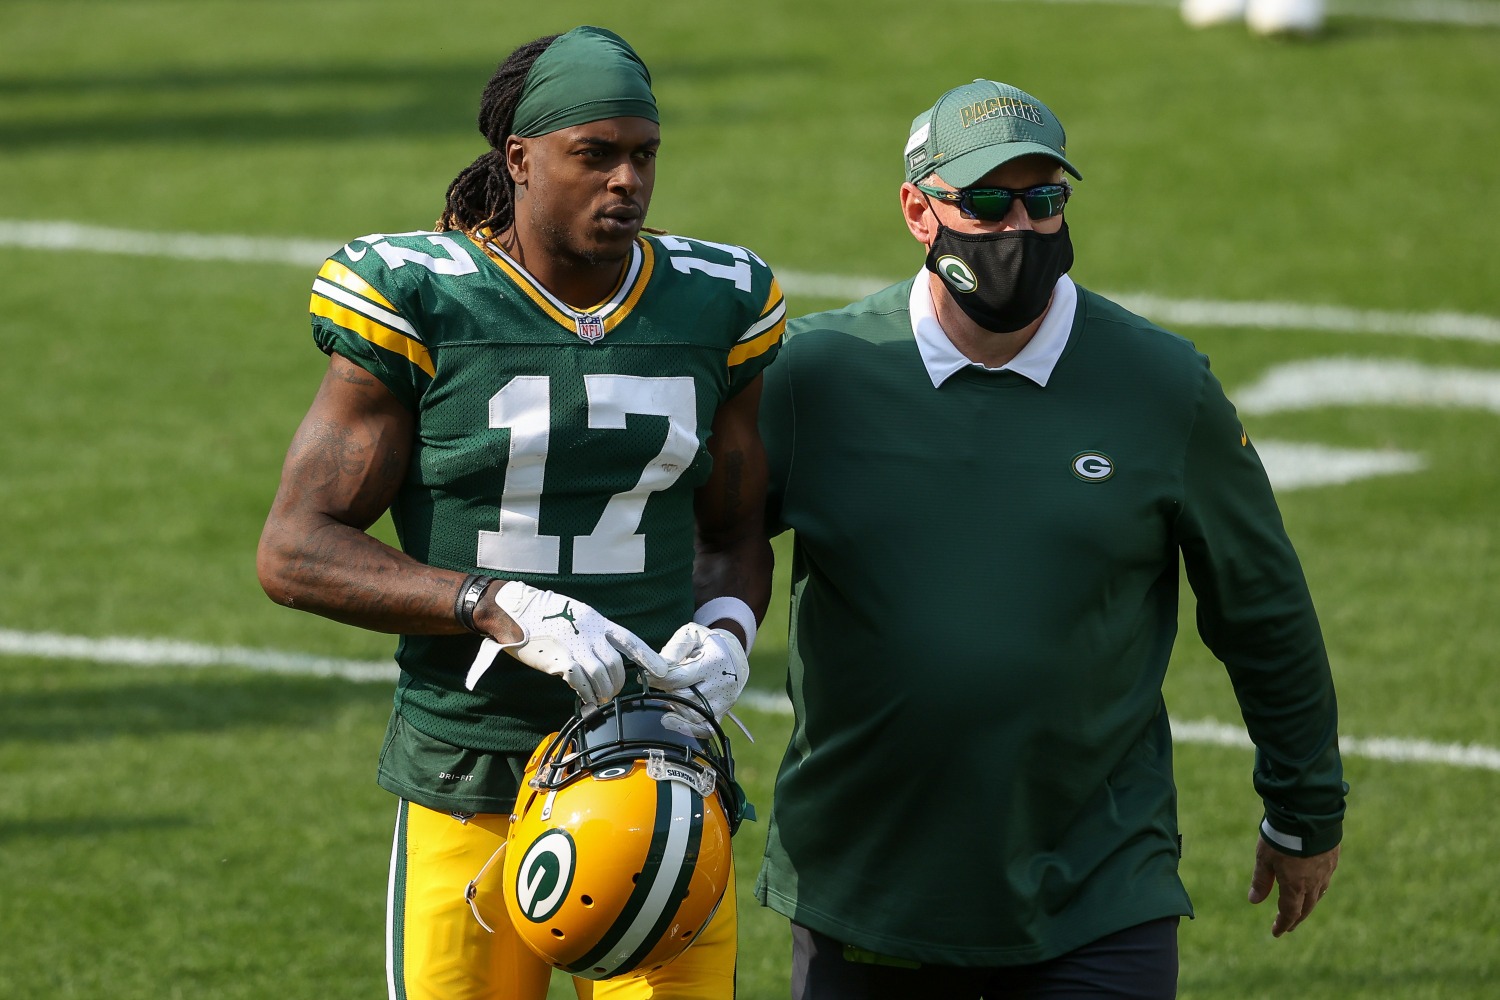 Packers star Davante Adams fired a shot at his own team for keeping him out of Monday Night Football. Did Green Bay make the right call?